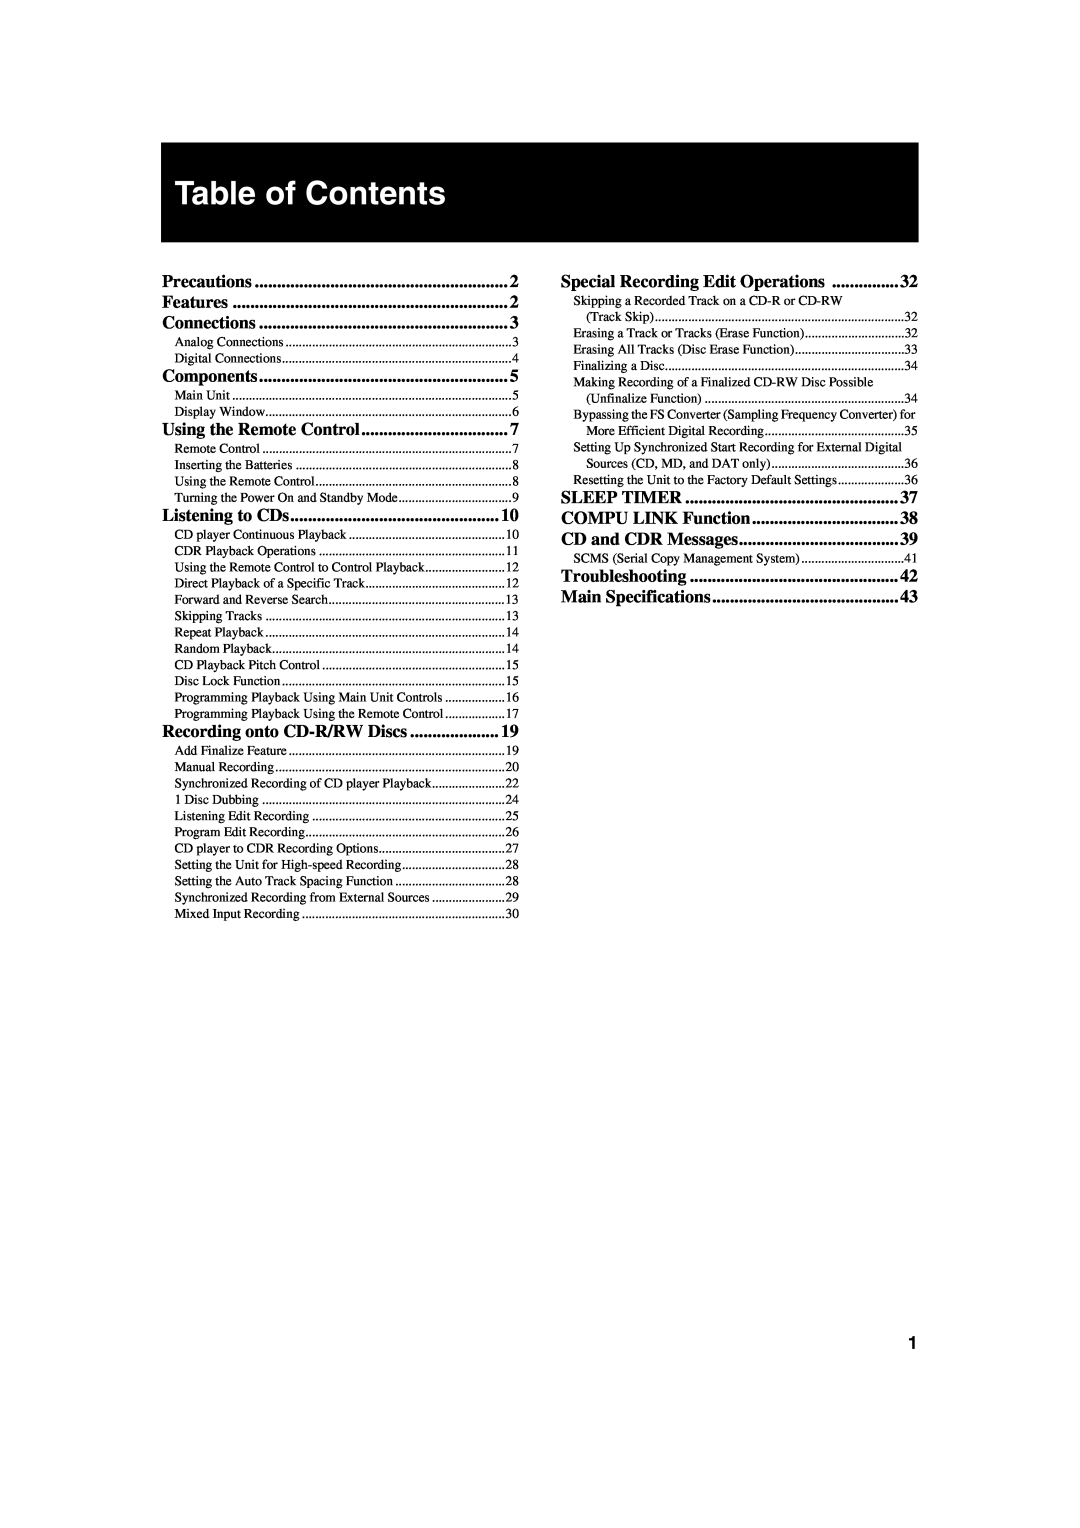 JVC XL-R2010BK manual Table of Contents 